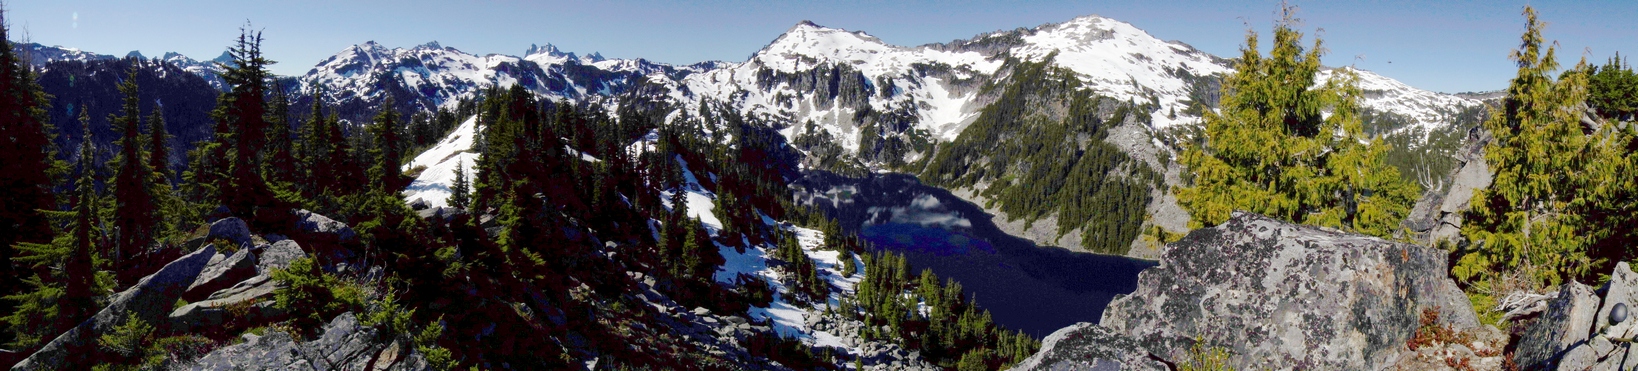 big heart lake panorama from point 5359 in alpine lakes wilderness, wa